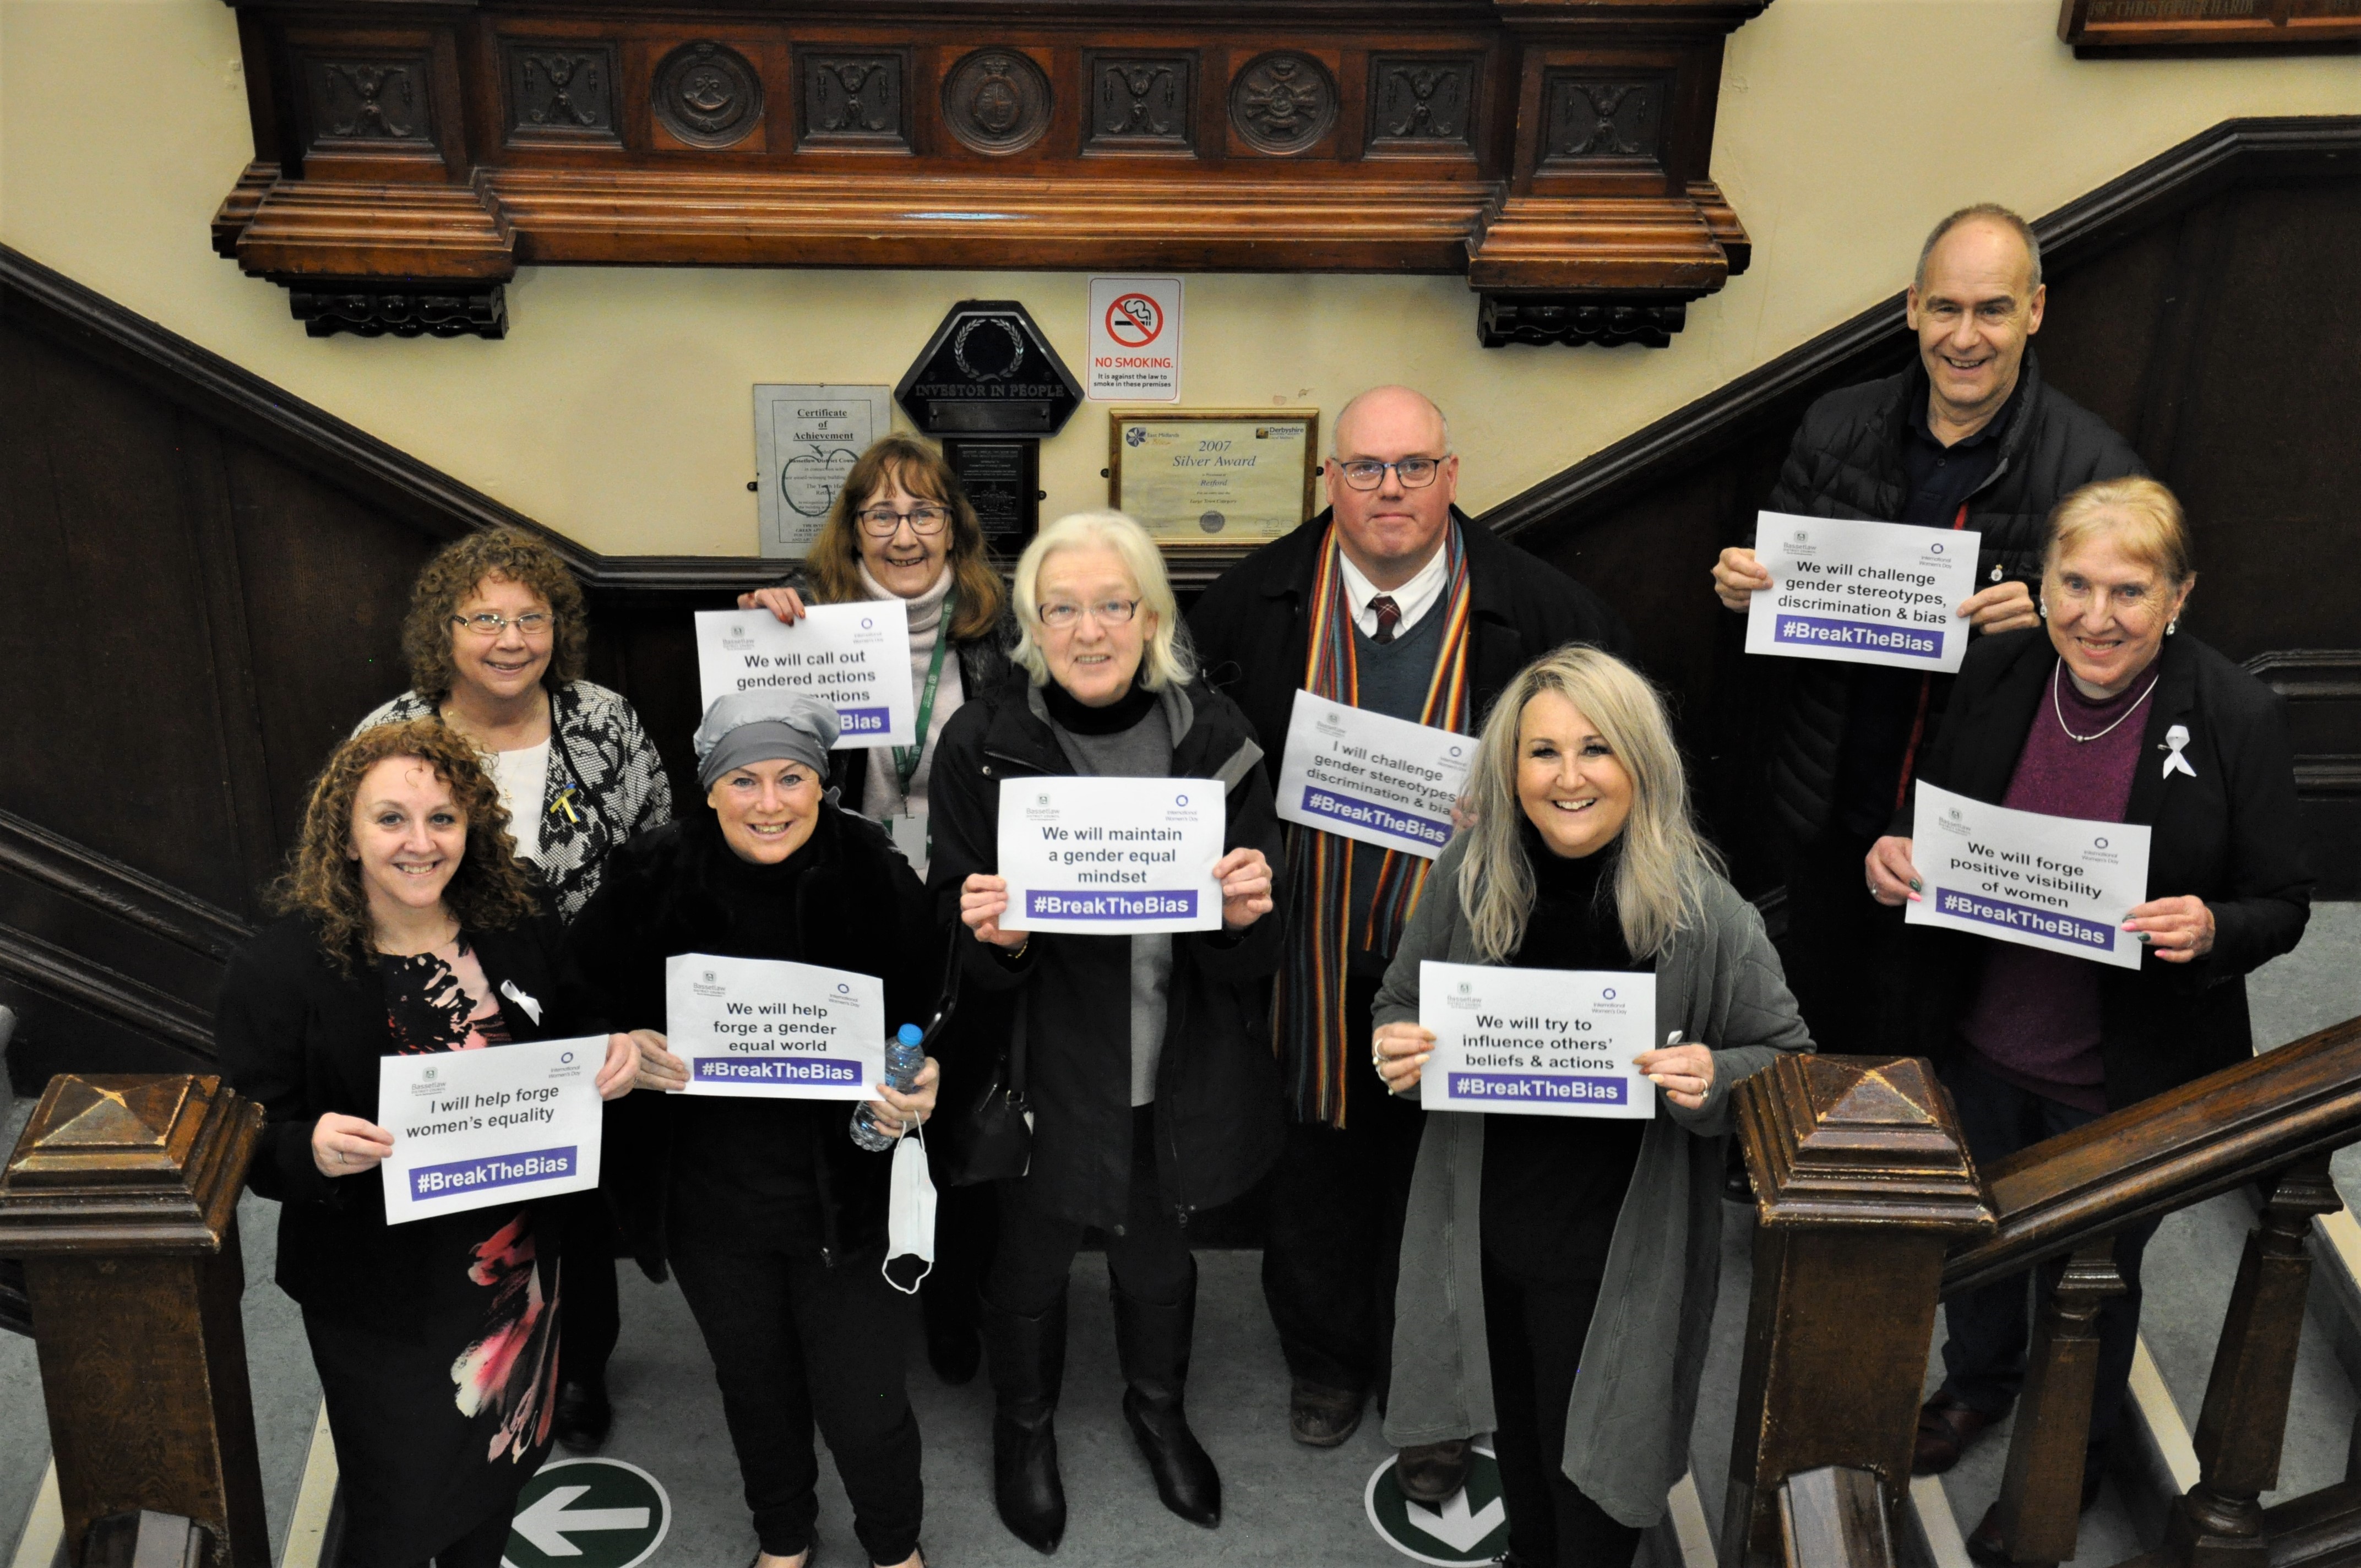 Council takes action on Violence Against Women and Girls.